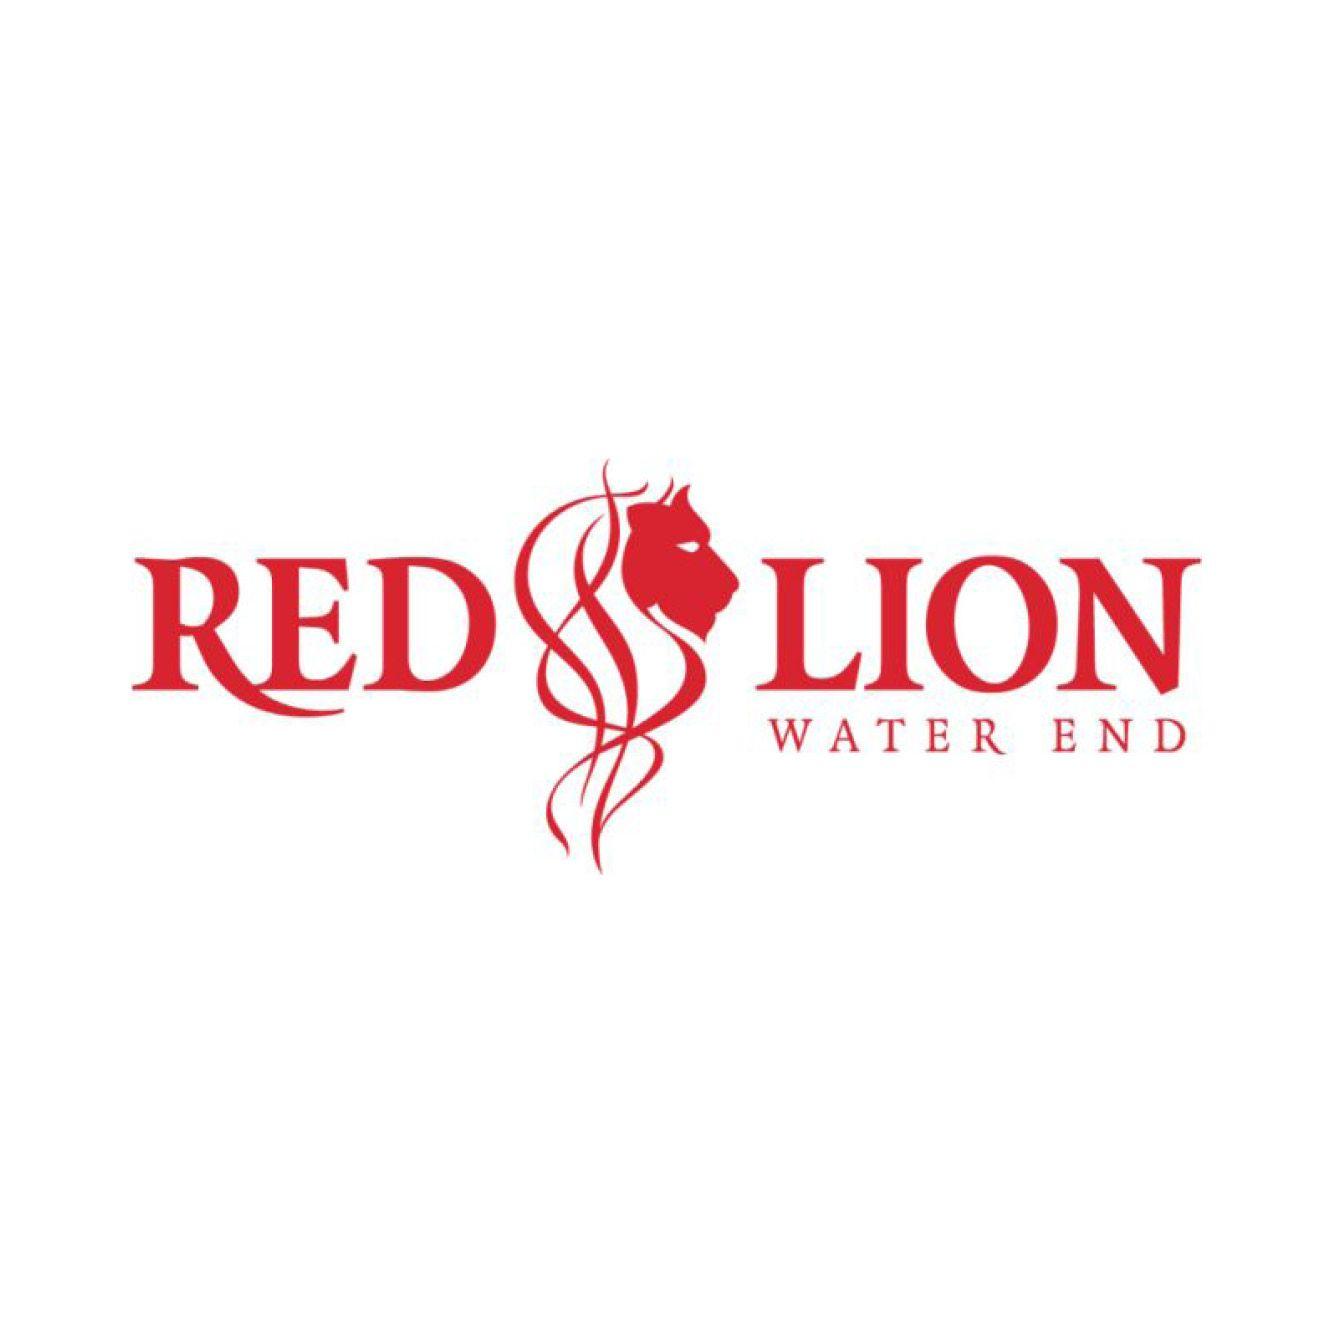 Red Lion Water Logo - 100% NYE at The Red Lion, Water End | London New Years Eve Party ...